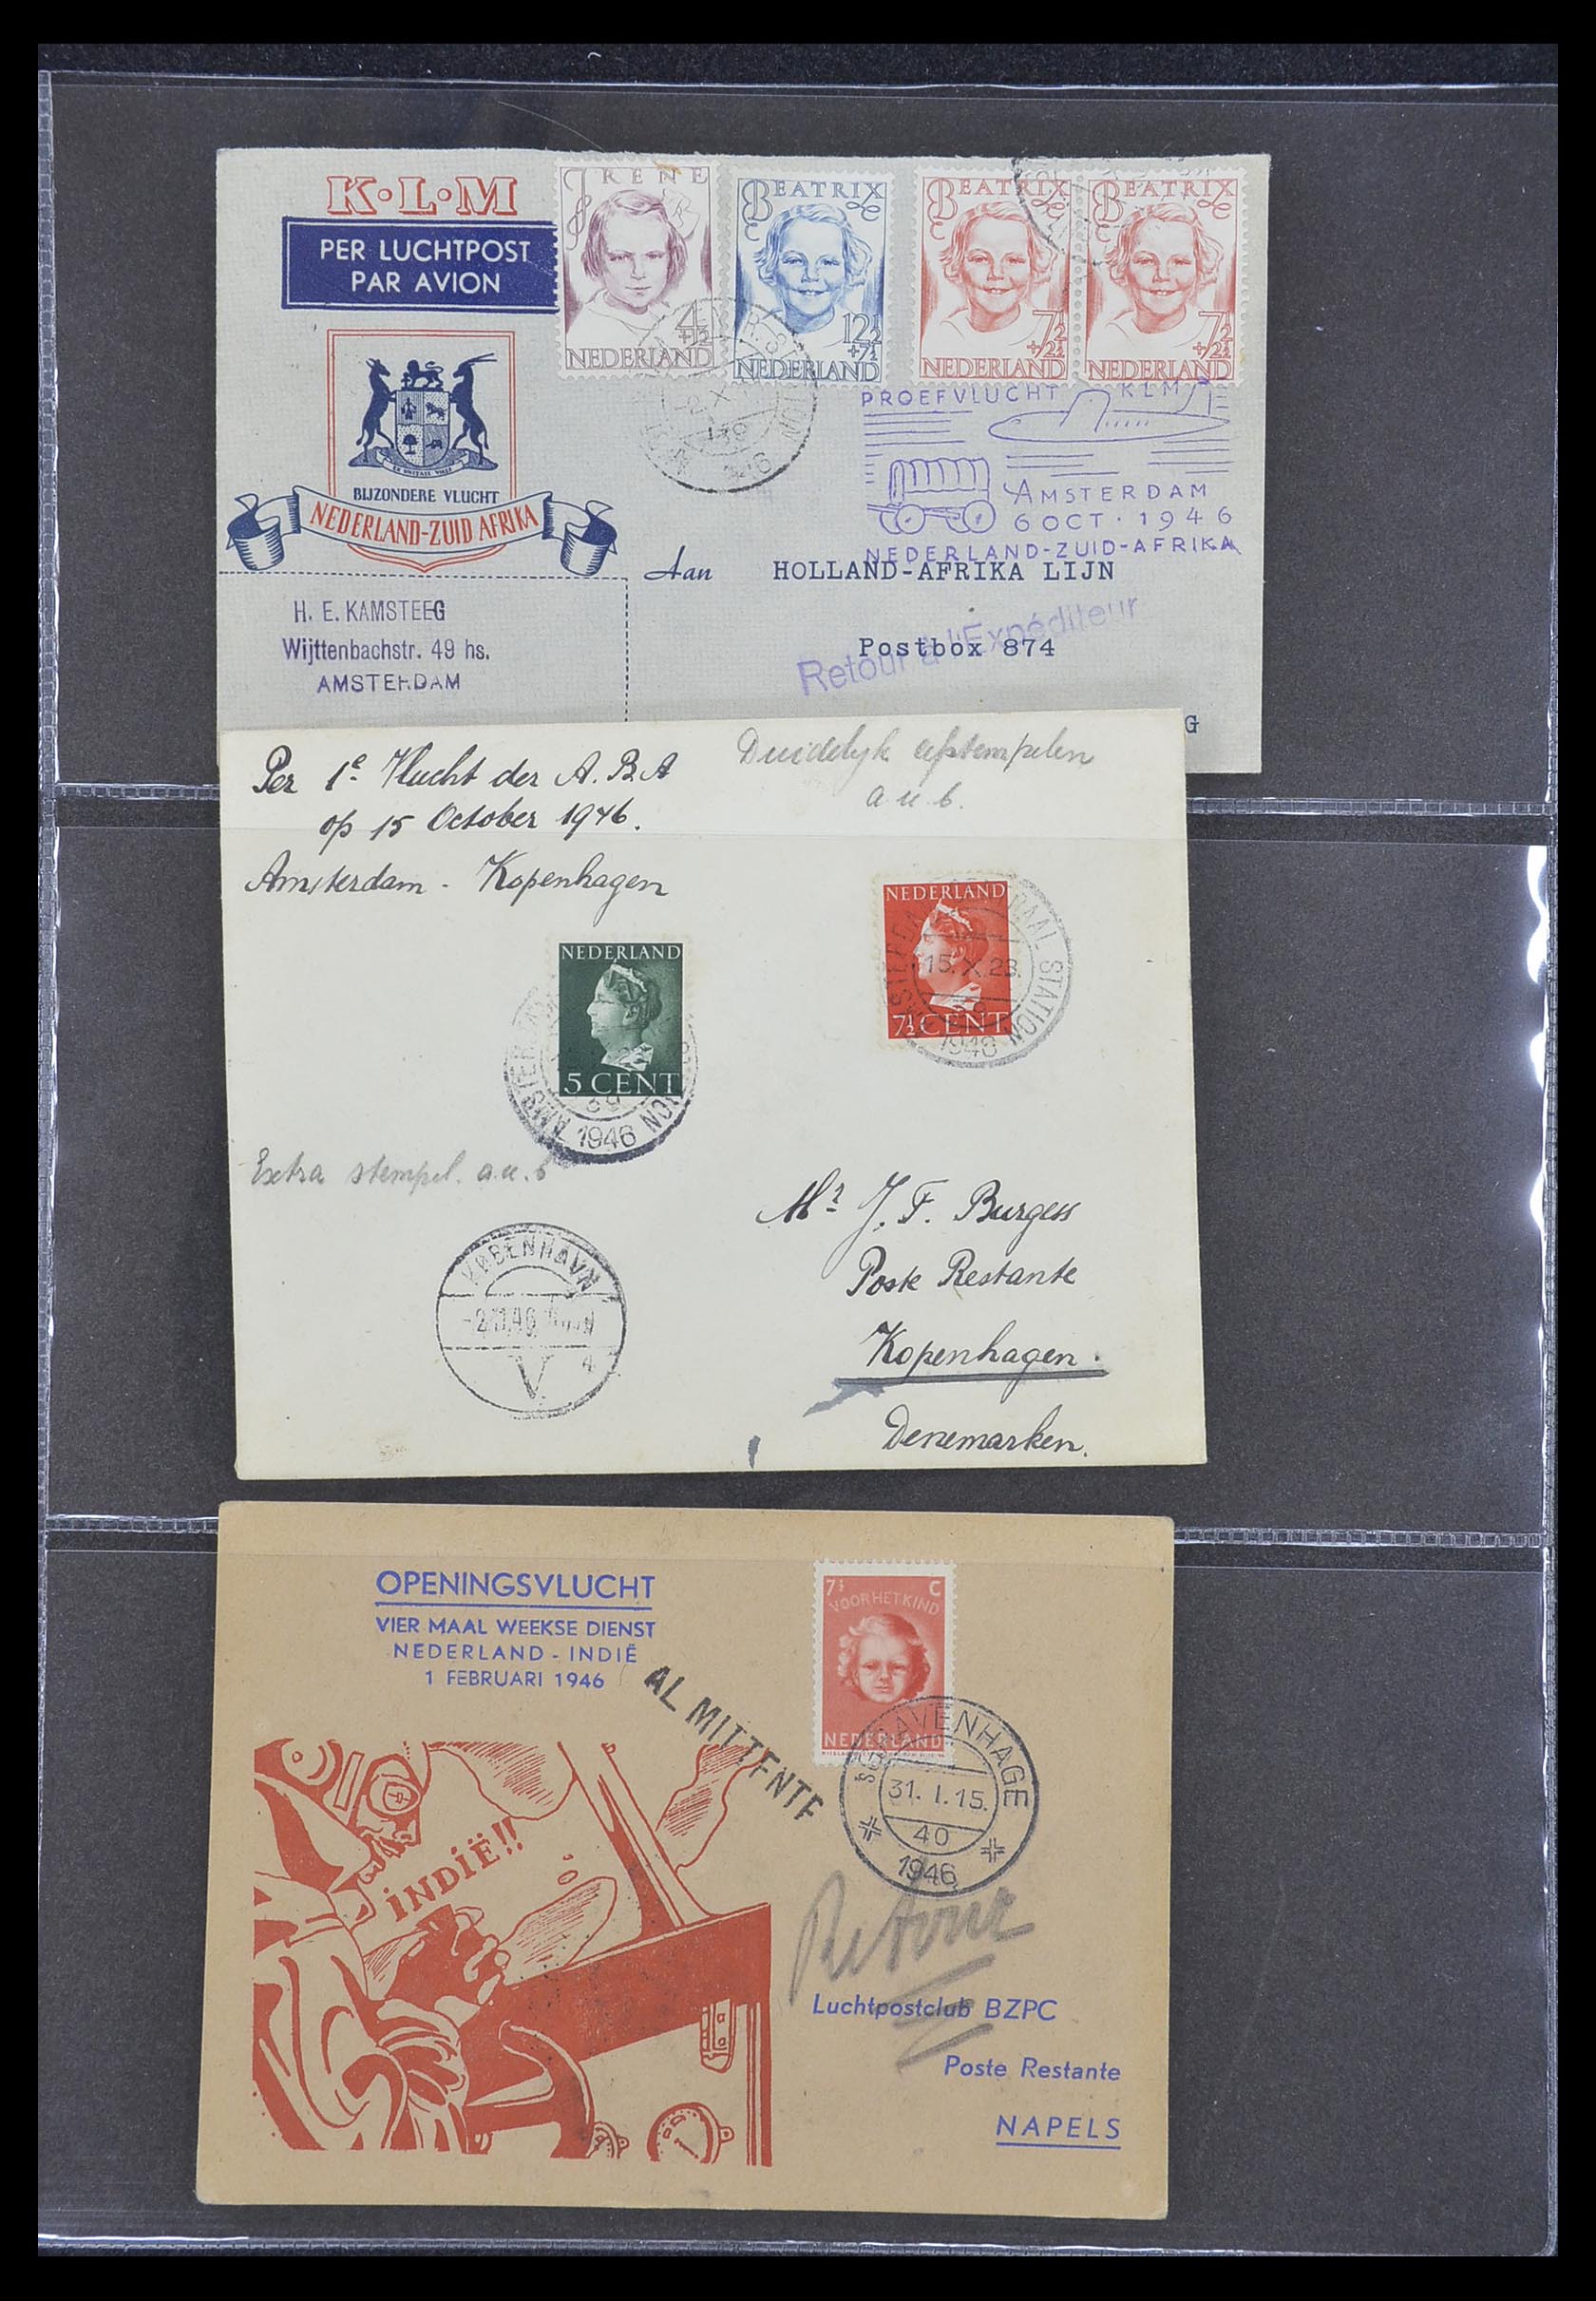 33330 167 - Stamp collection 33330 Netherlands covers 1852-1959.